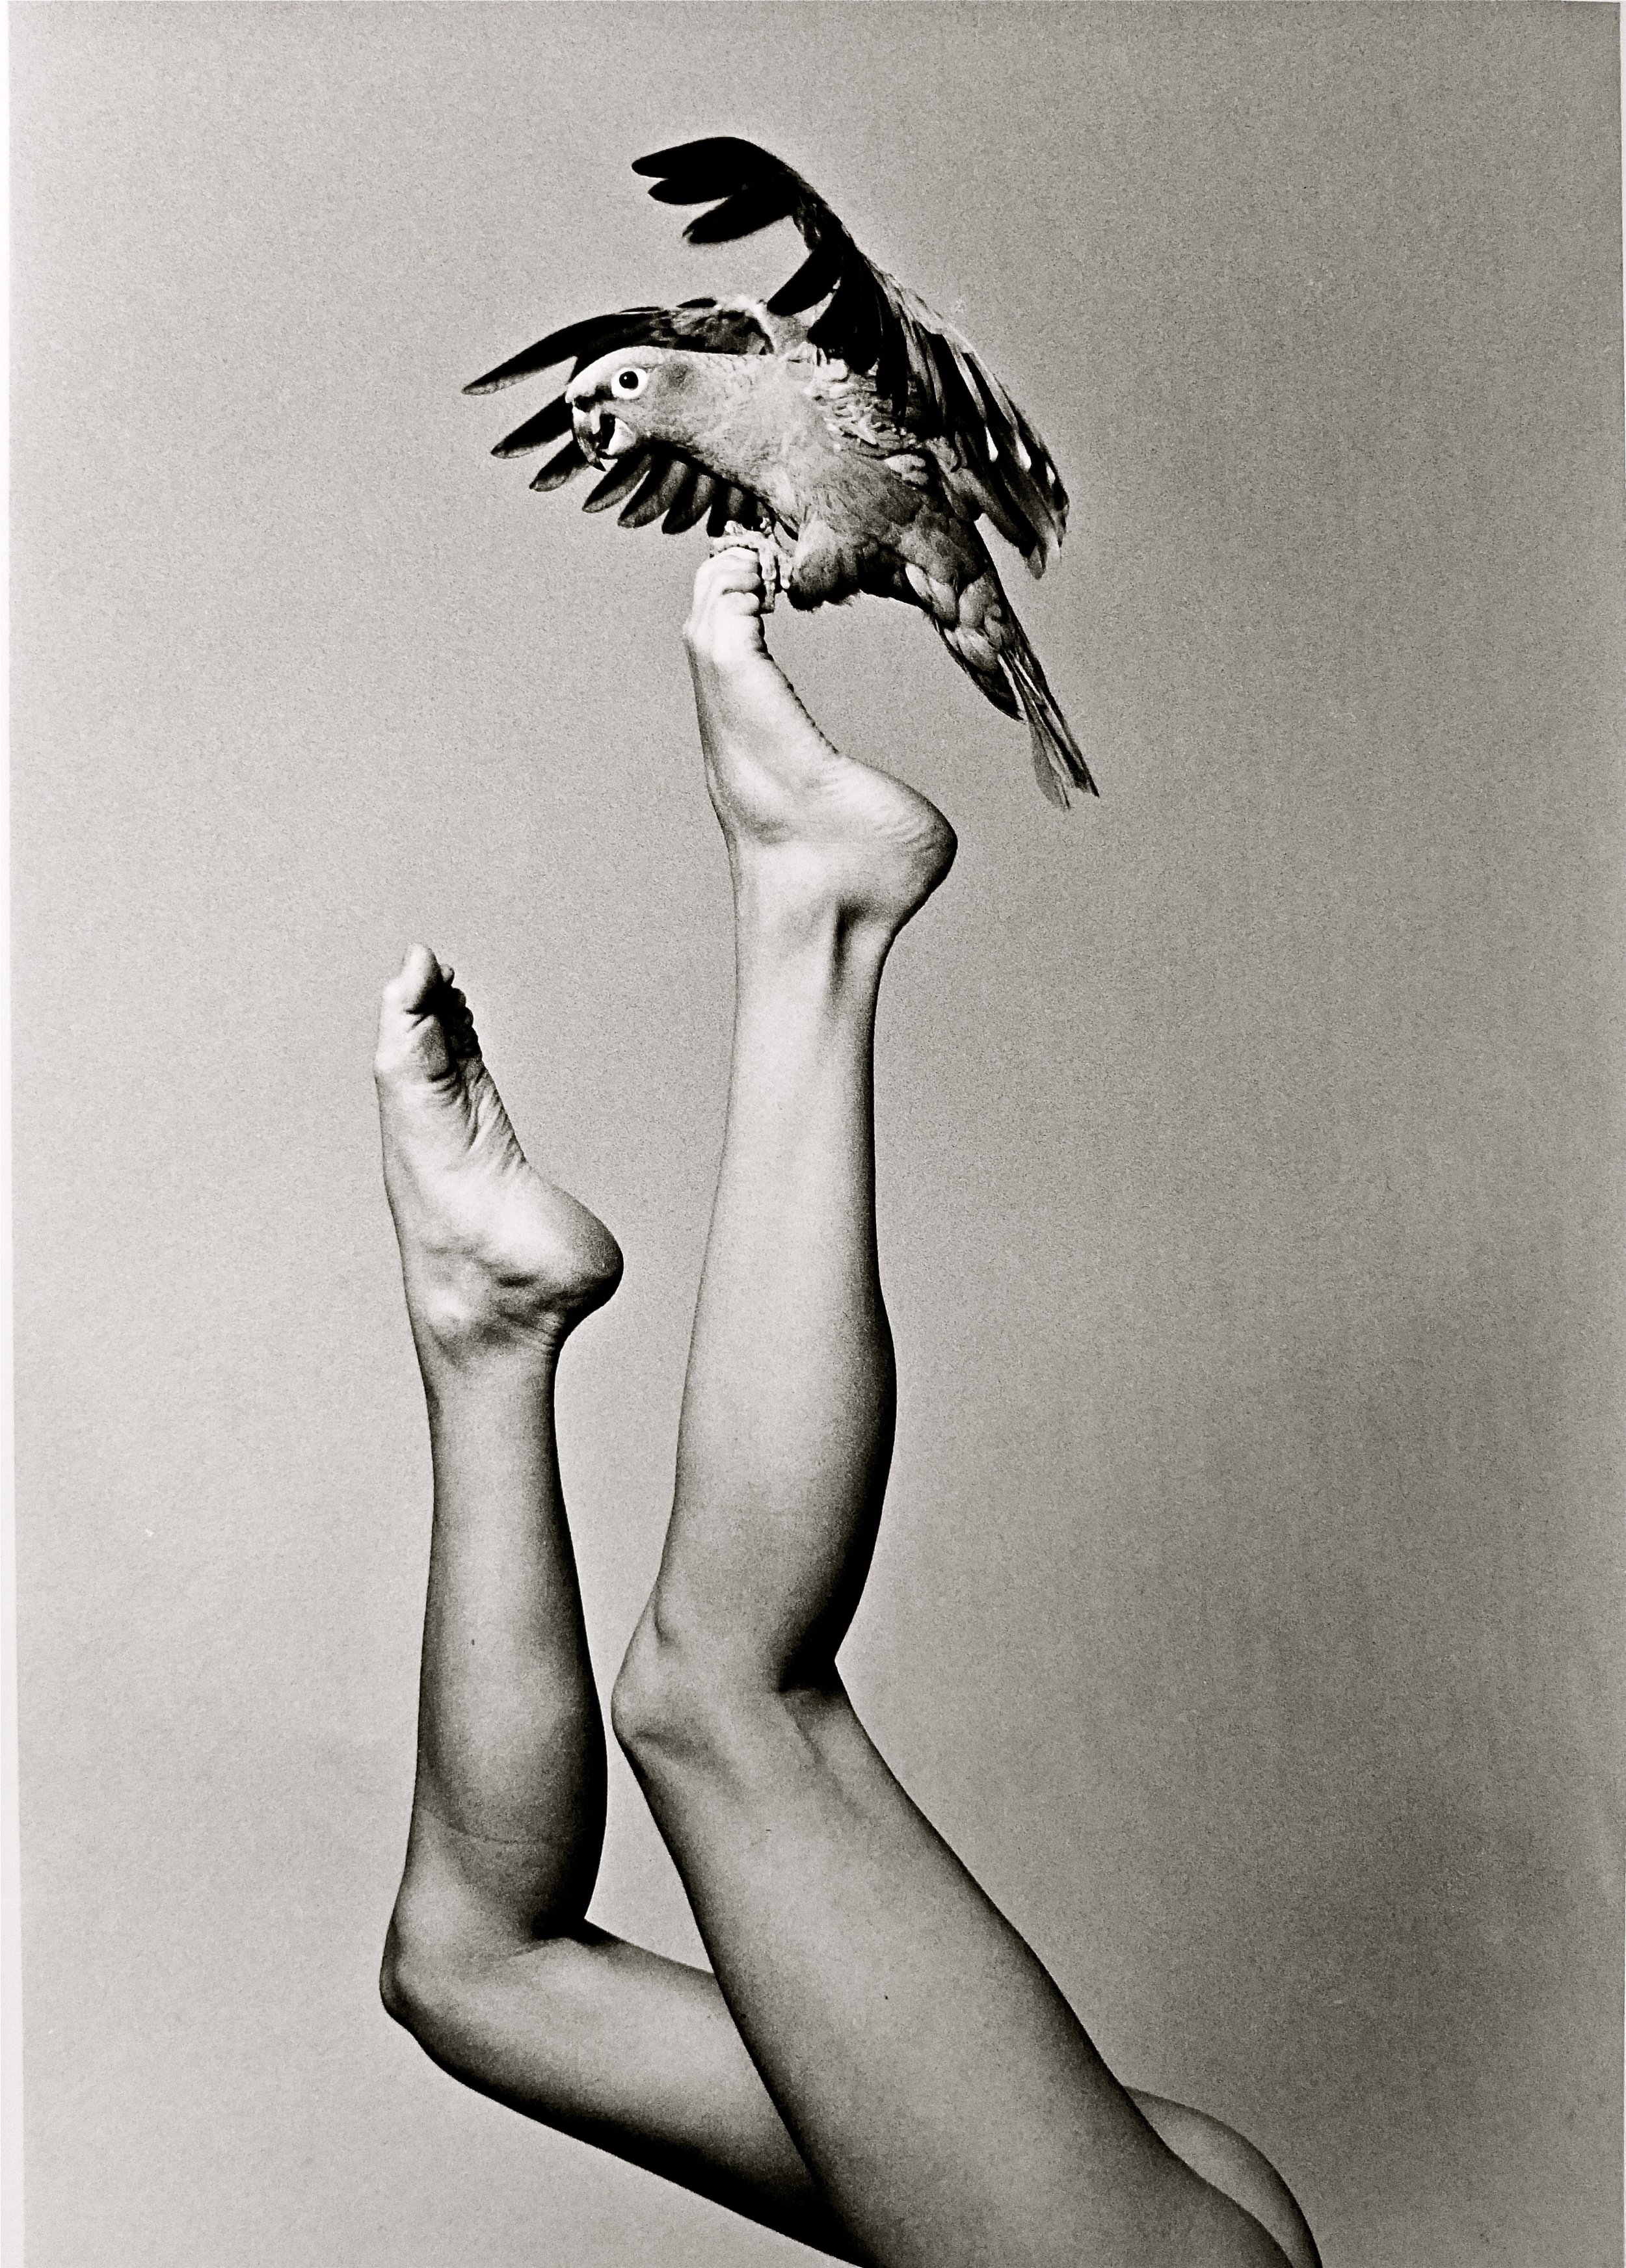  Two bare legs shoot up toward the ceiling, one higher than the other. A parakeet flaps its wings and sits on the curled toes of the higher leg. 